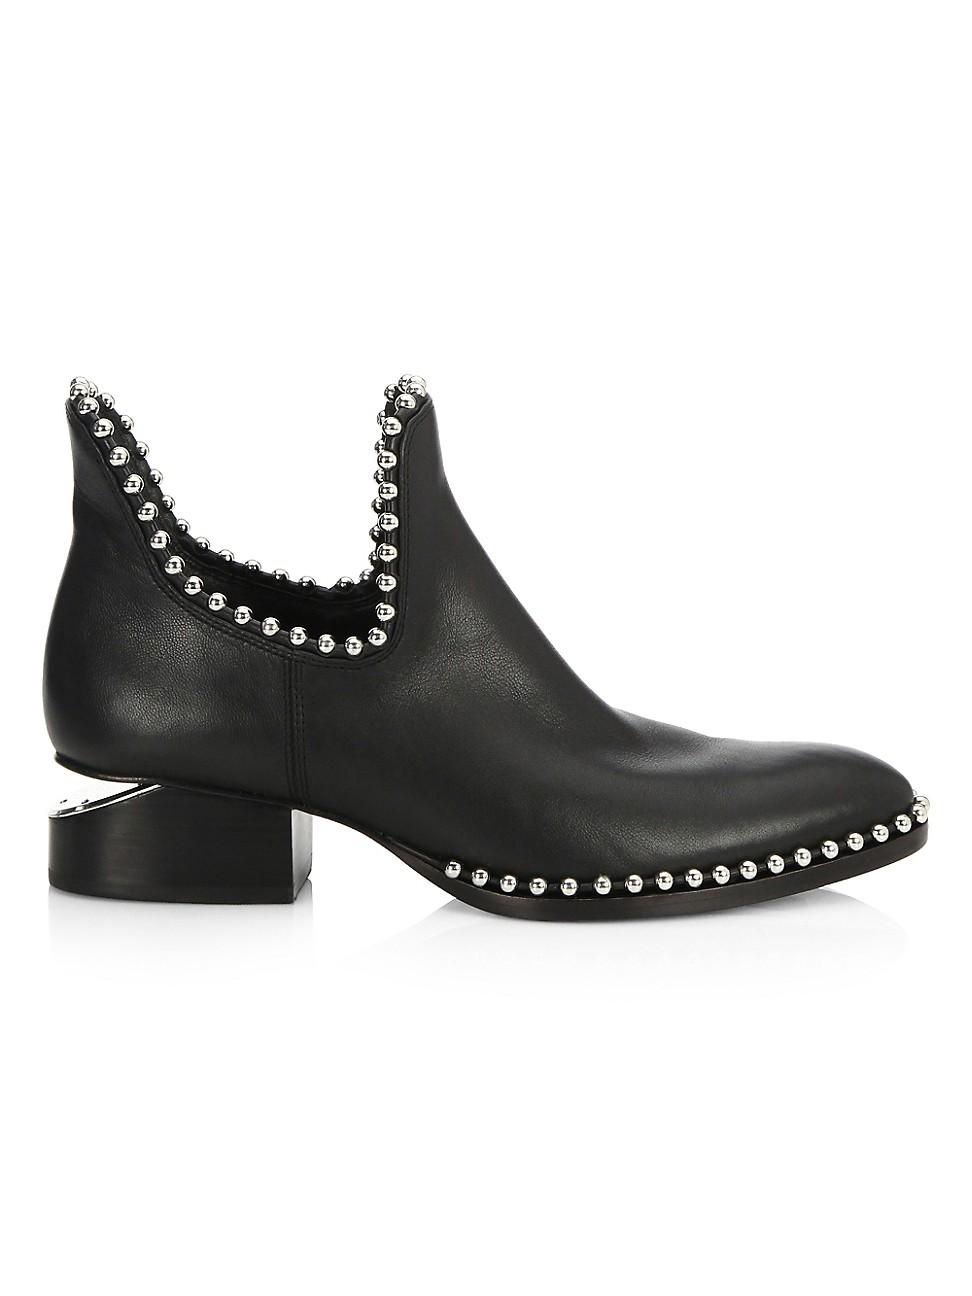 Alexander Wang Kori Cutout Studded Leather Ankle Boots in Black | Lyst